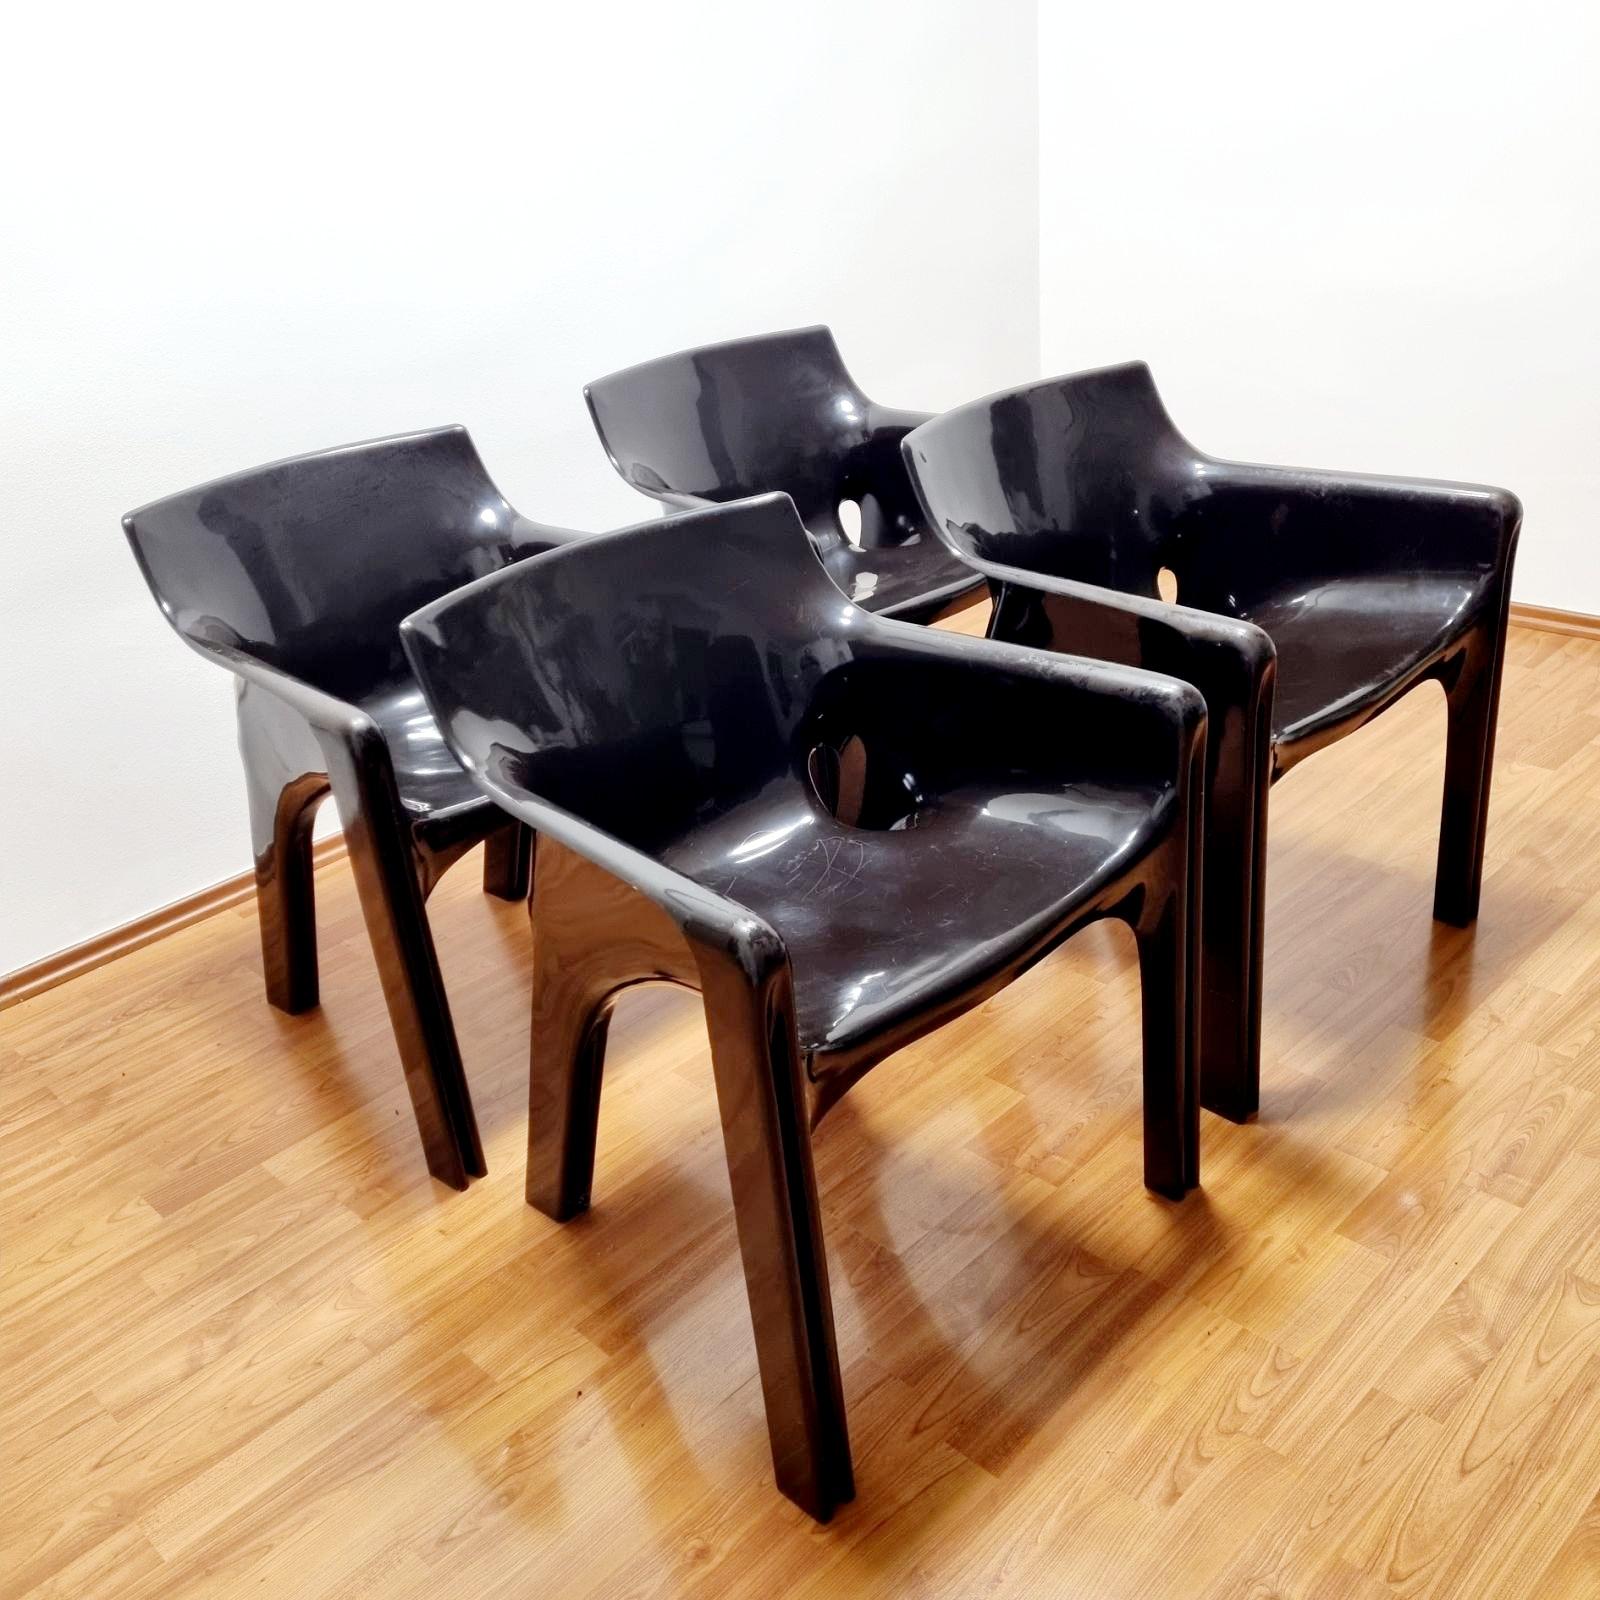 Set of 4 Italian Gaudi Chairs by Vico Magistretti for Artemide, Italy 70s For Sale 2